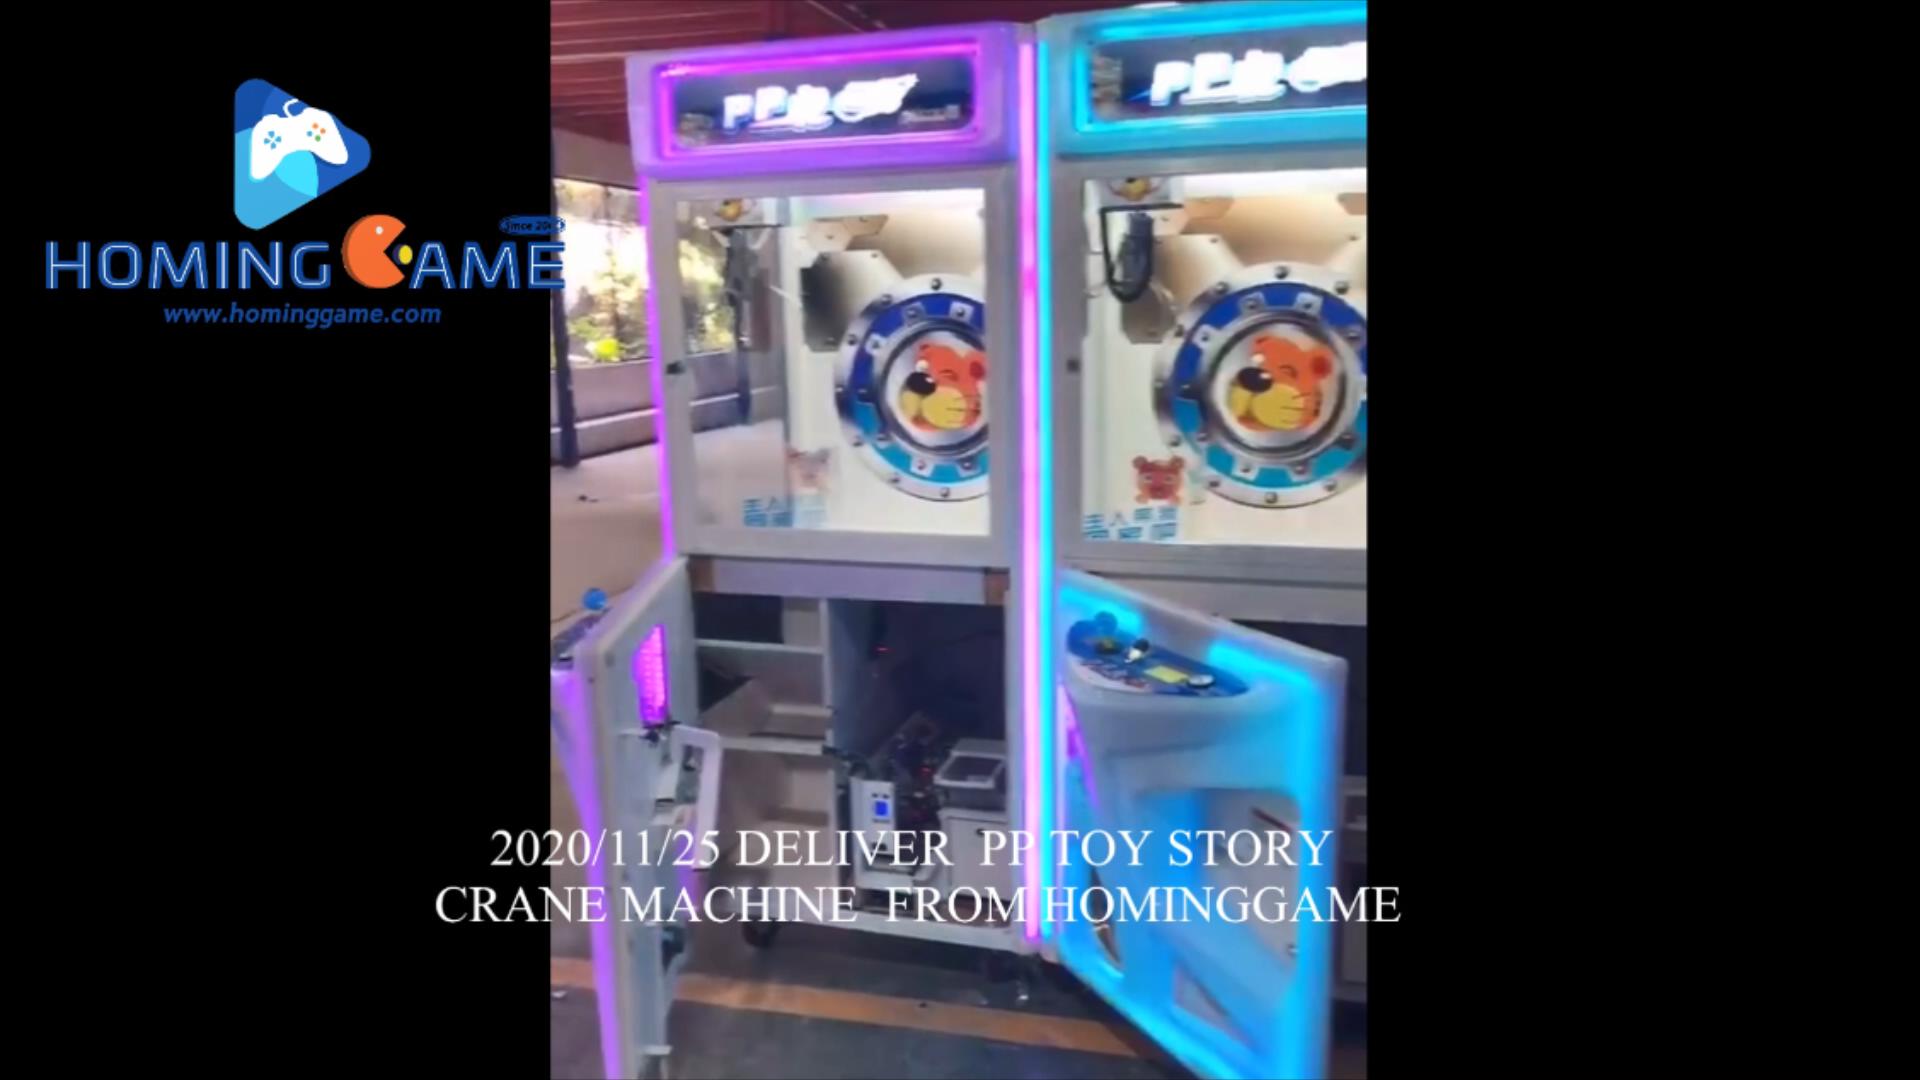 2020 11 25 Deliver Hot Sale Coin Operated PP Toy Story Crane Machine To USA from HomingGame（order call whatsapp:+8618688409495),toy story crane machine,toy story,crane machine,crane game machine,crane game,coin operated crane machine,coin operated crane game machine,catch prize game machine,catch plush crane machine,game machine,arcade game machine,coin operated game machine,amusement machine,amusement park game equipment,indoor game machine,prize vending machine,vending machine,indoor game,electrical game machine,arcade games,hominggame,www.gametube.hk,entertainment game,family entertainment game machine,amusement crane machine,electrical game,shopping mall prize game machine,prize vending,vending game machine